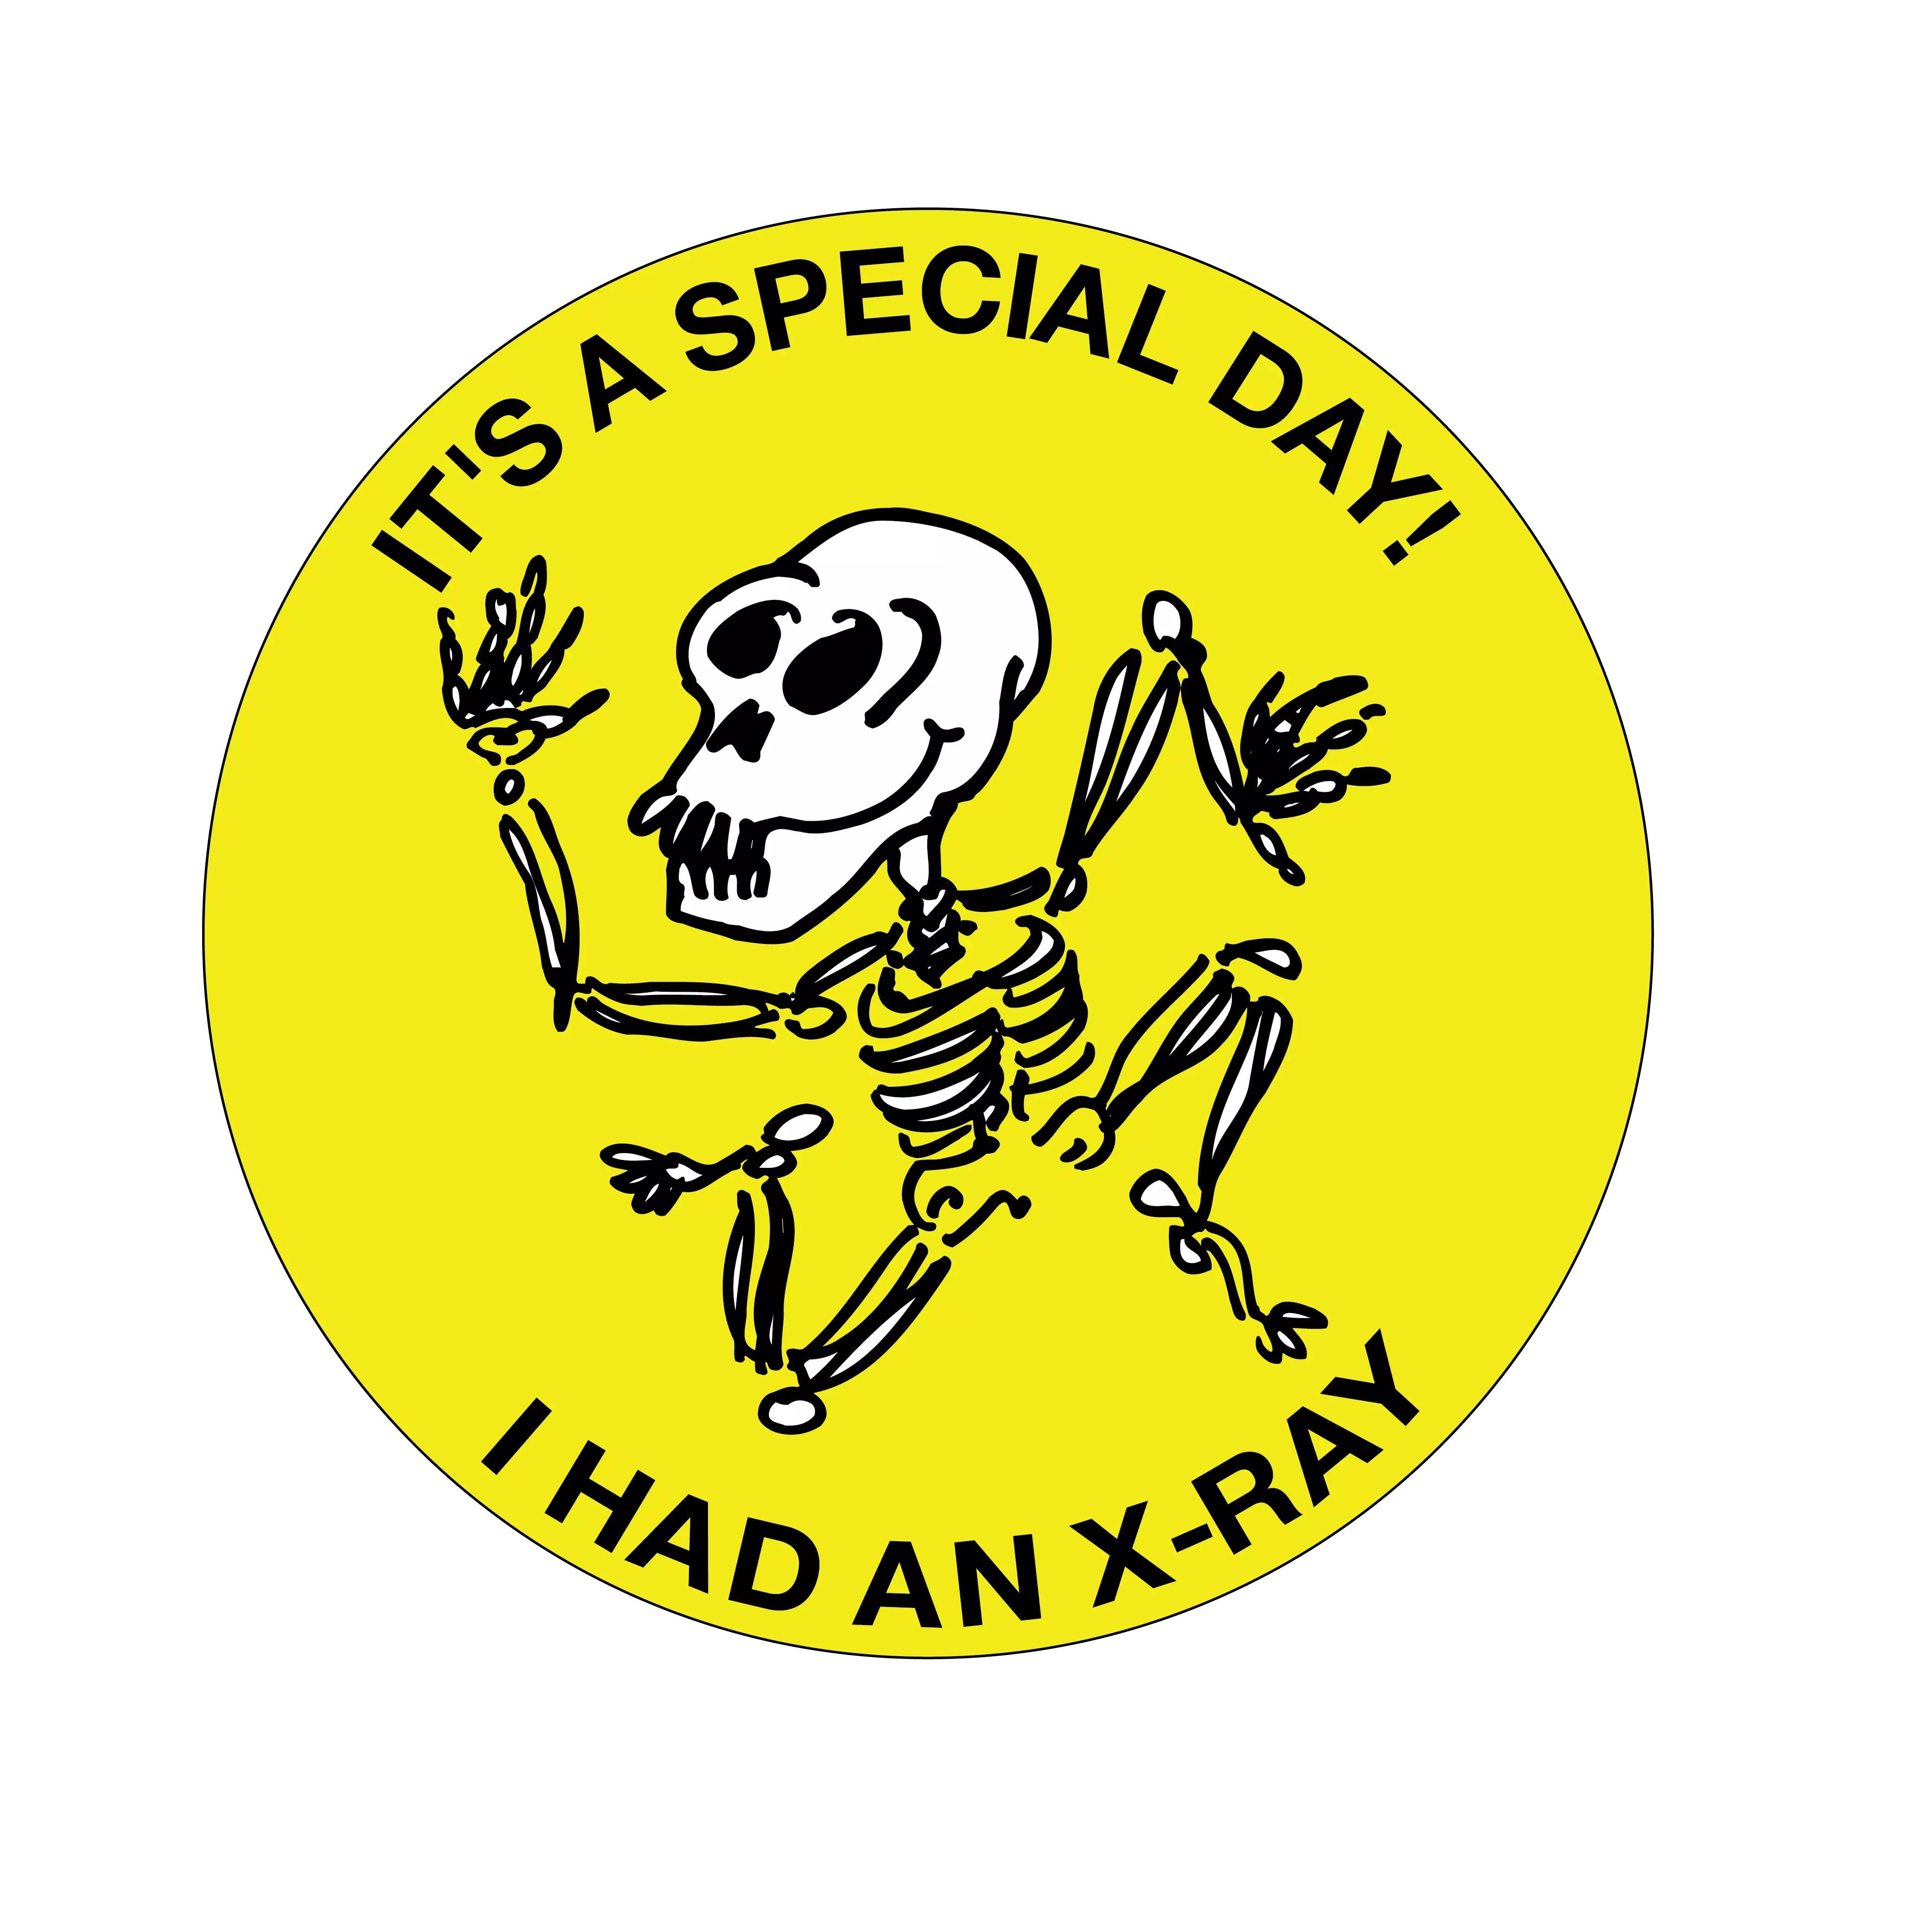 It's Special Day I Had An X-Ray